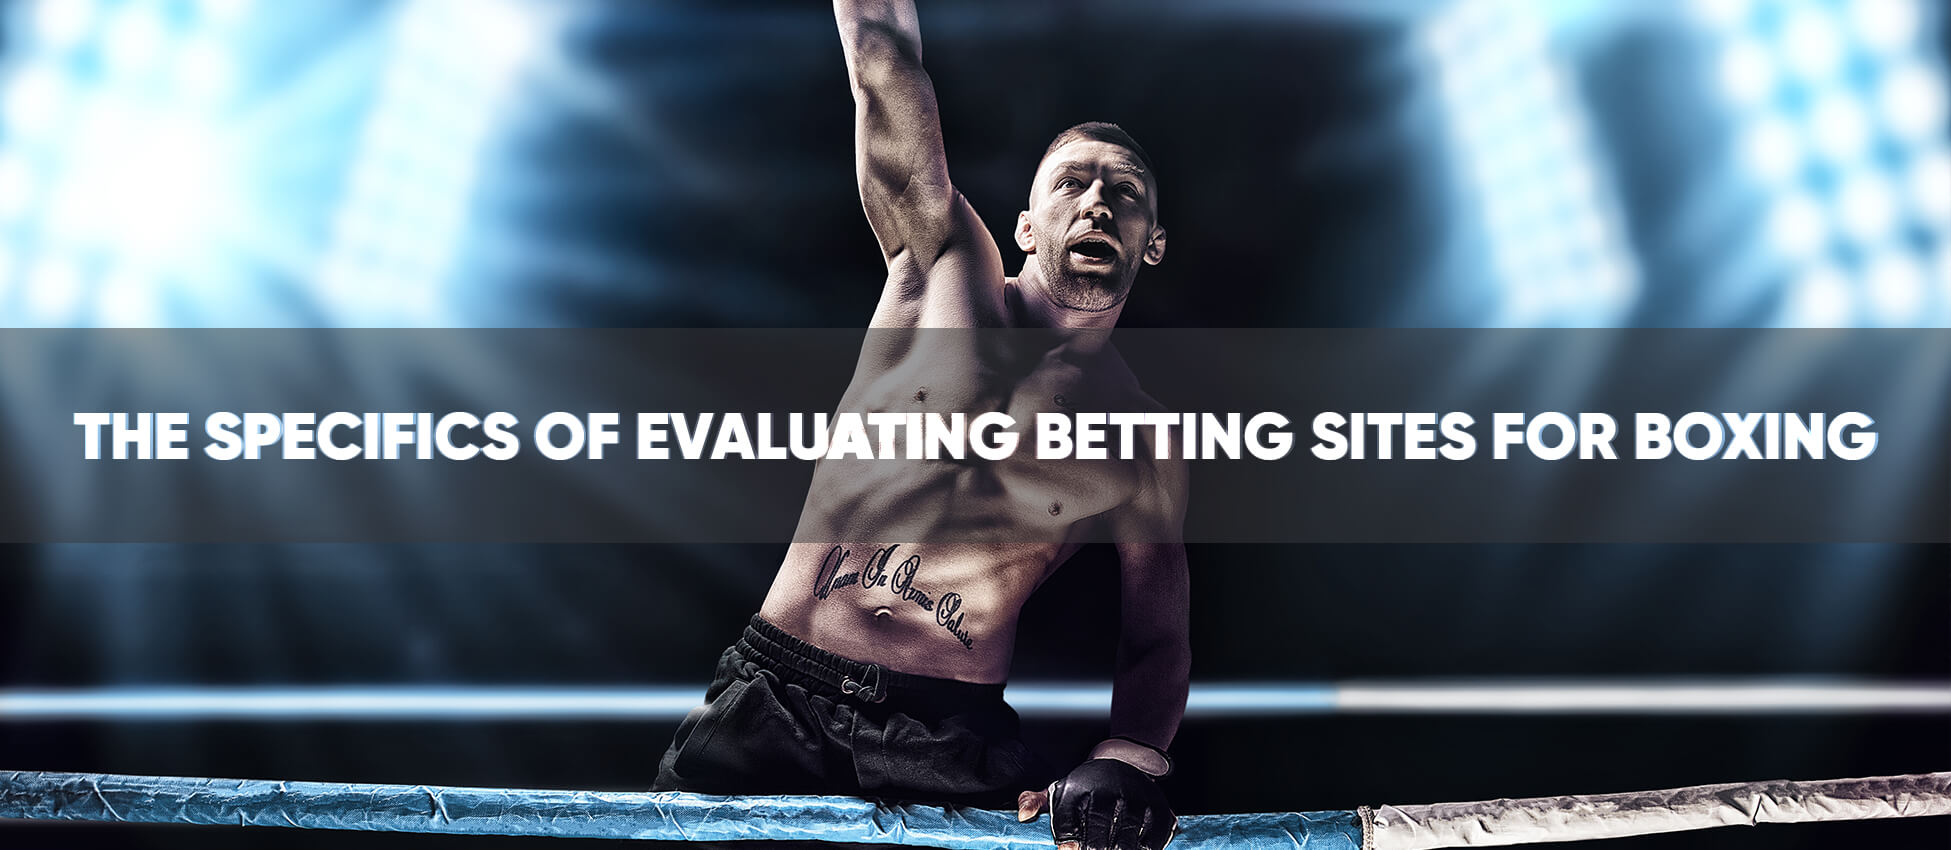 The specifics of evaluating betting sites for boxing